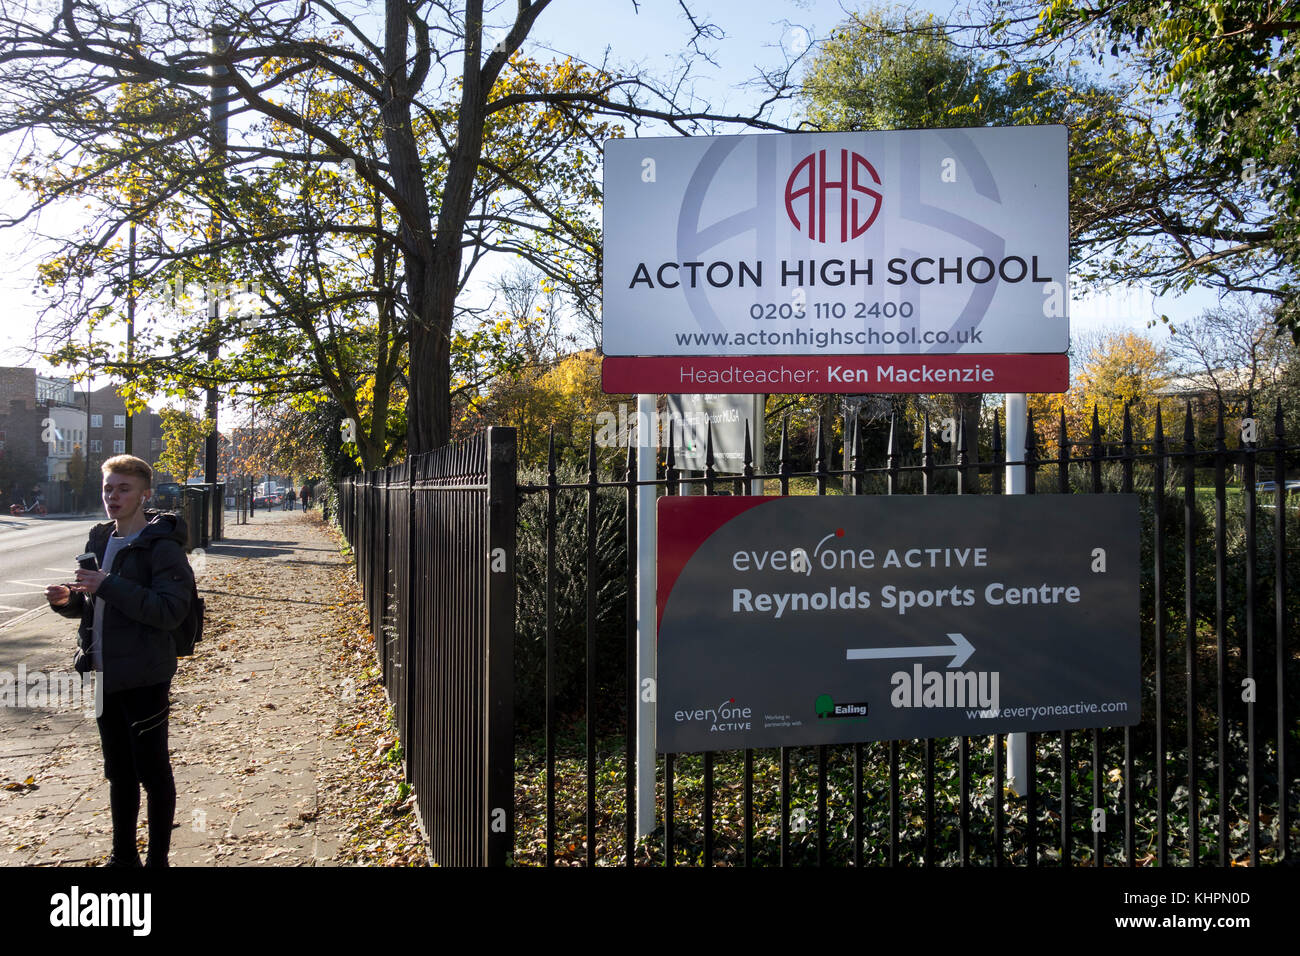 Acton High School - a coeducational secondary school in the Acton area of the London Borough of Ealing, UK. Stock Photo